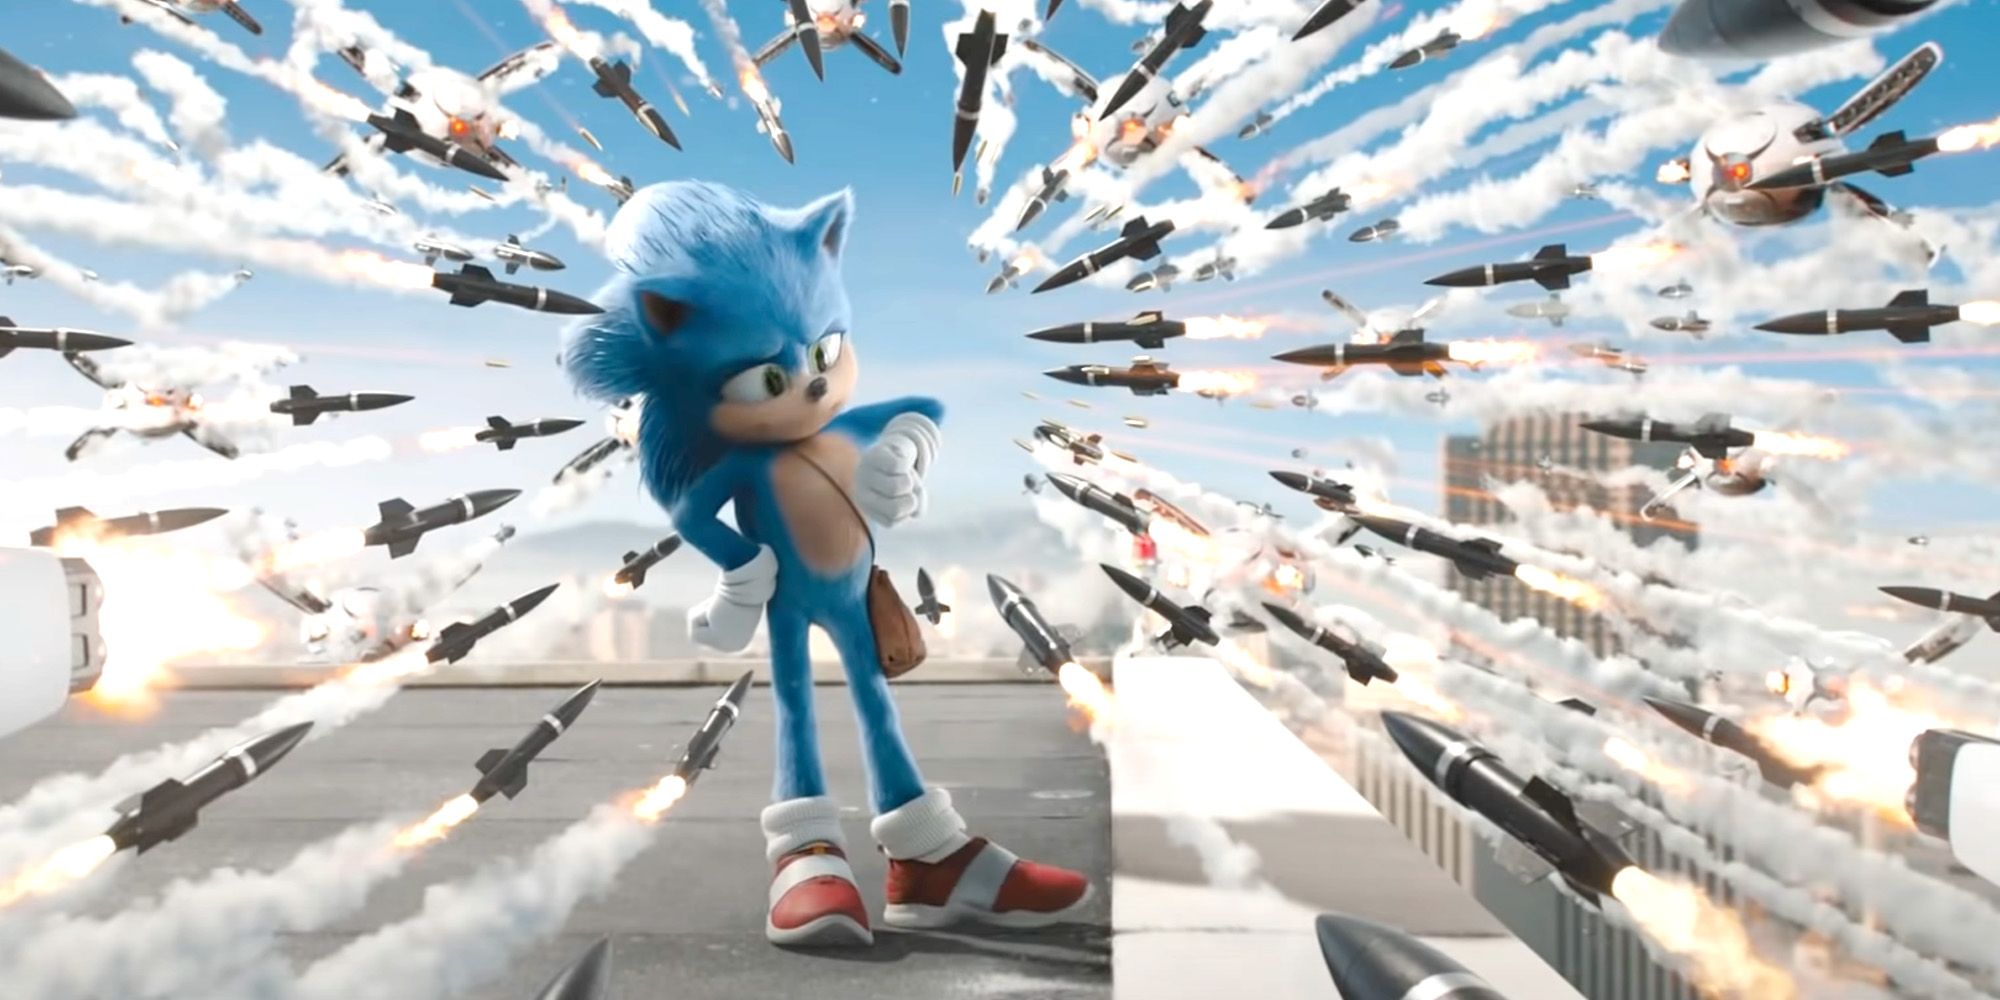 Sonic The Hedgehog Movie - Sonic checking his watch while missiles fly toward him